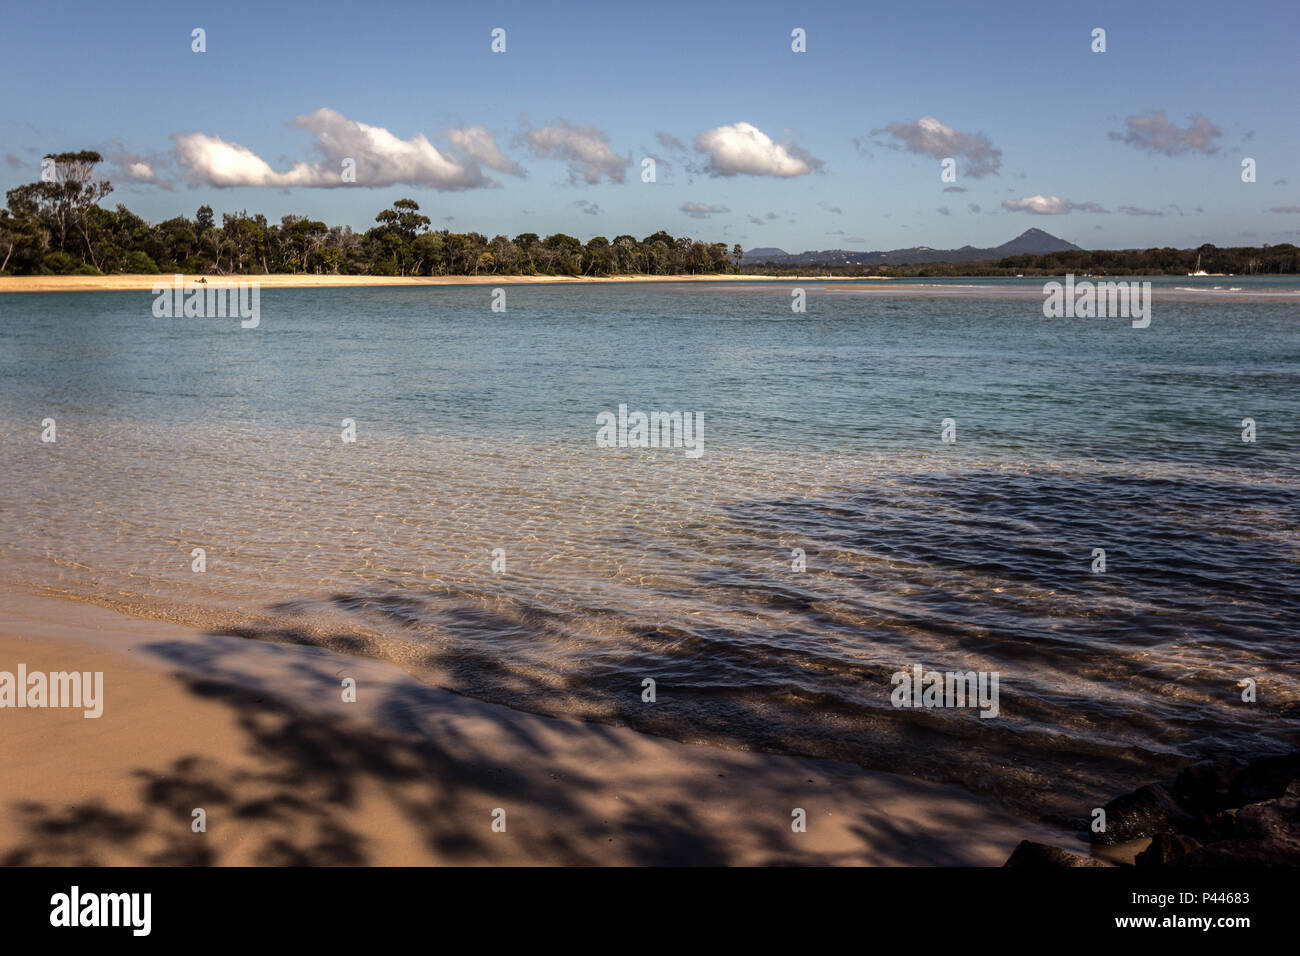 A tranquil Beach on the River Stock Photo